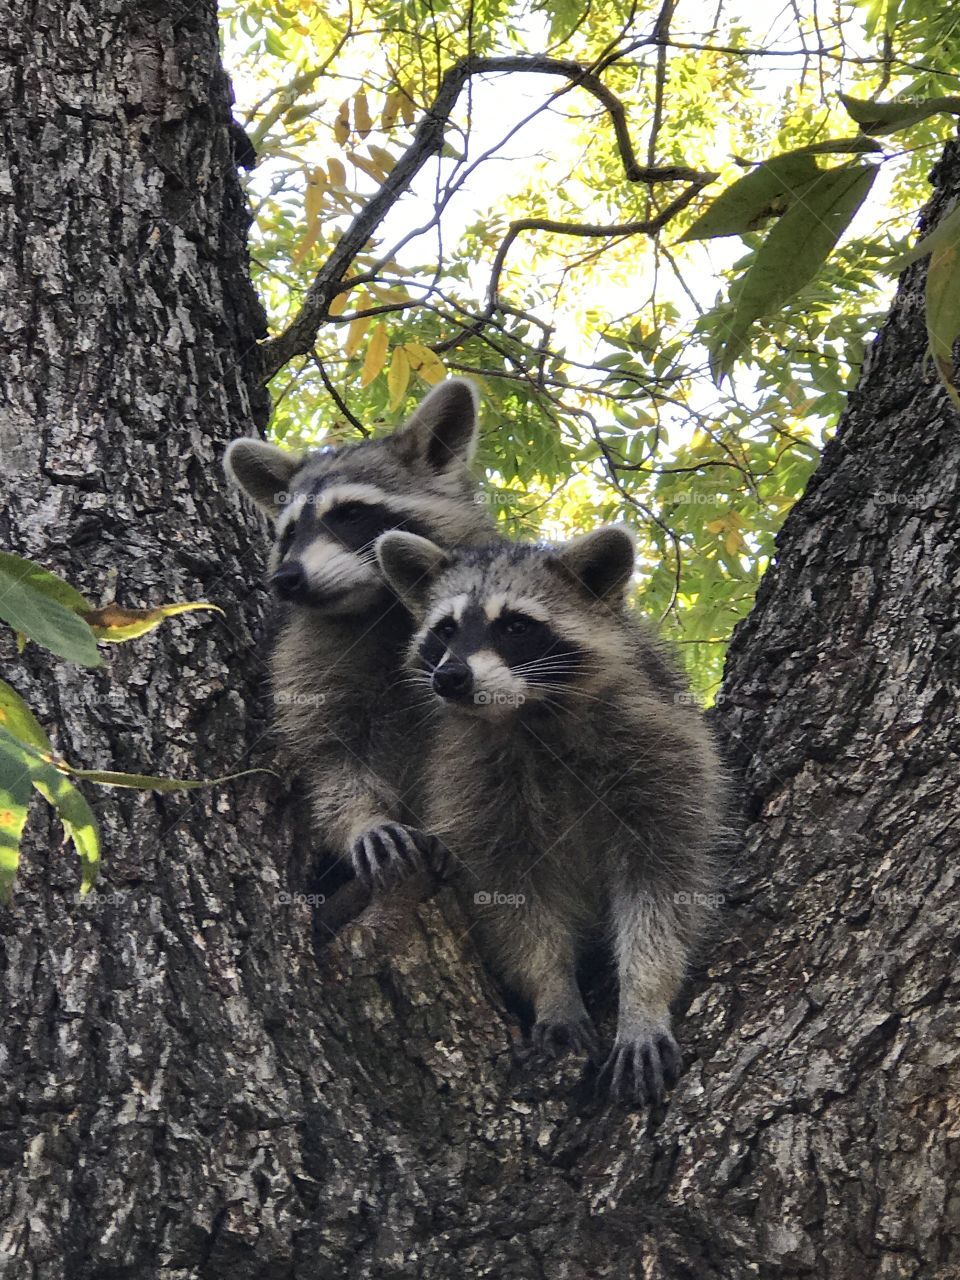 Raccoon baby in a tree